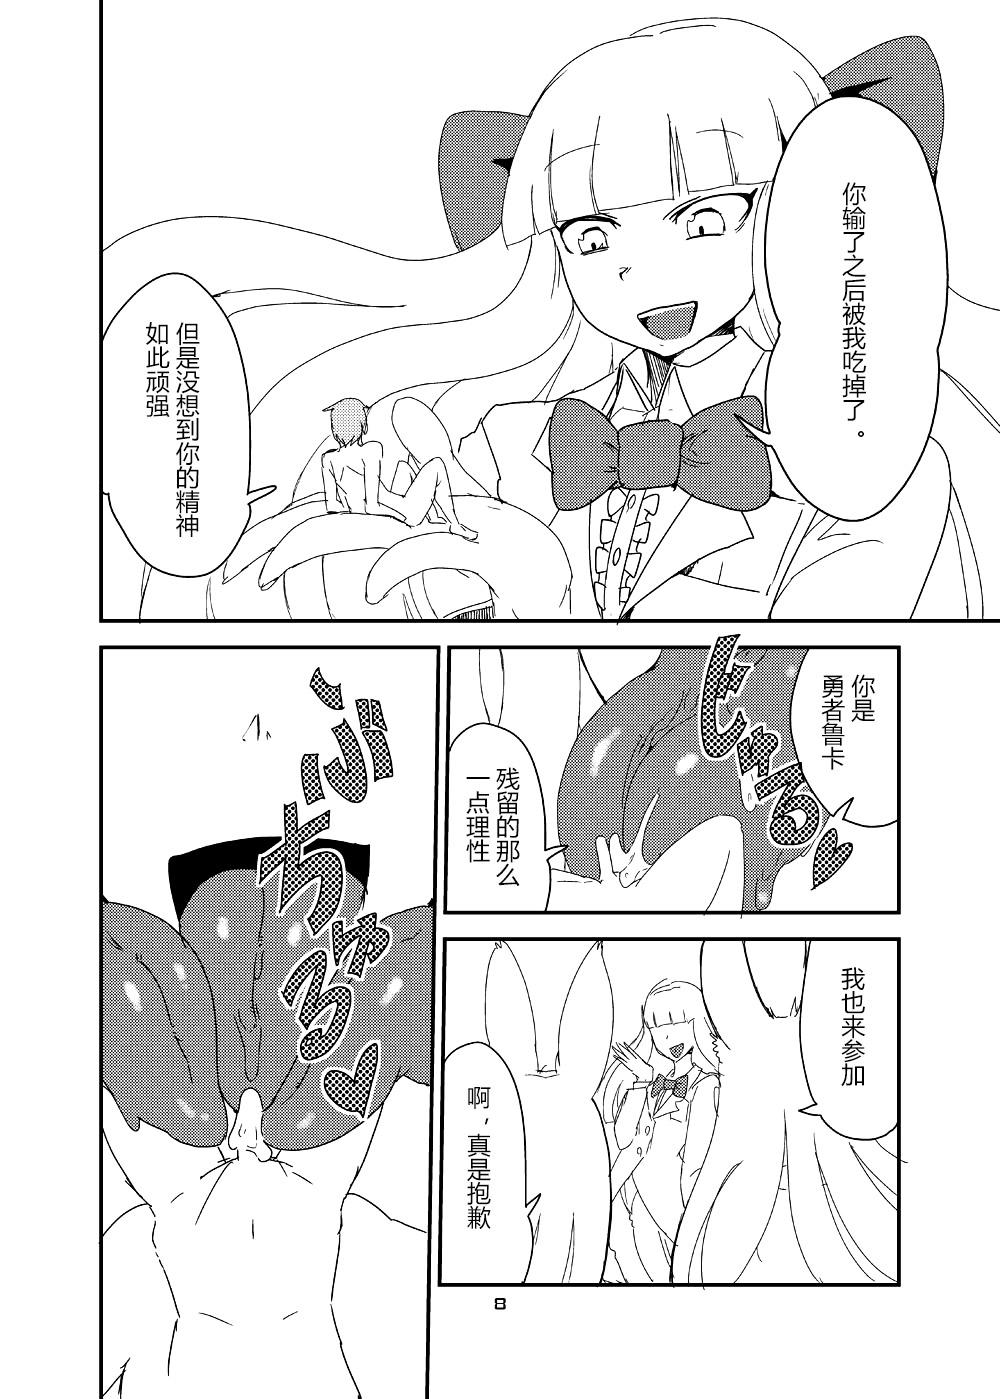 Master Mon Musu Quest! Beyond The End 6 - Monster girl quest Deflowered - Page 7